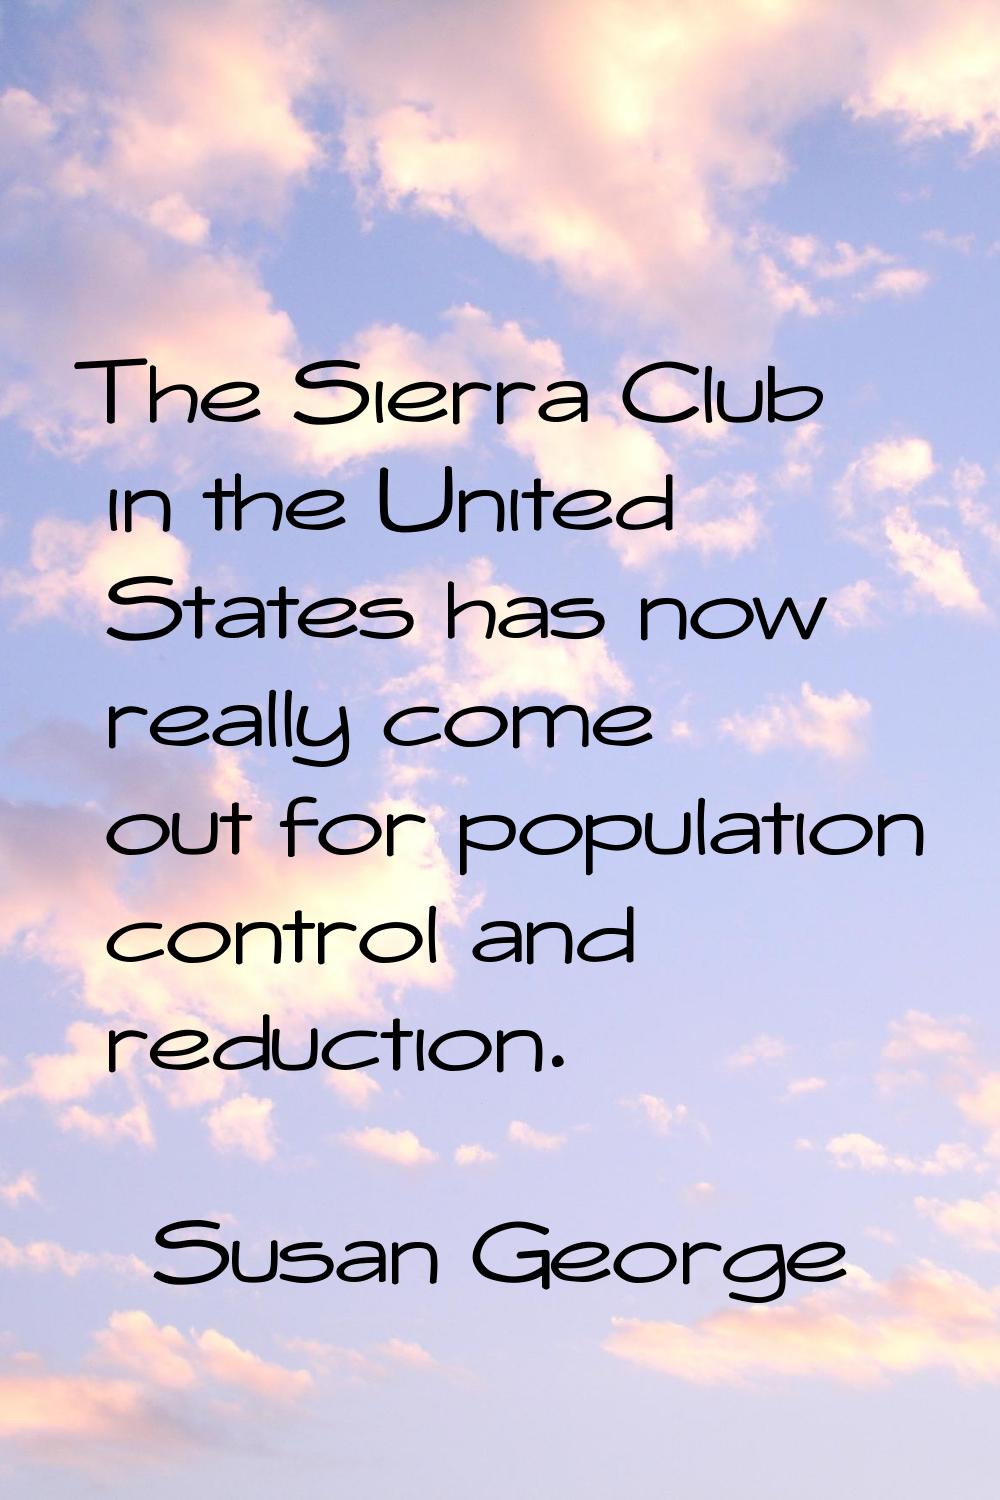 The Sierra Club in the United States has now really come out for population control and reduction.